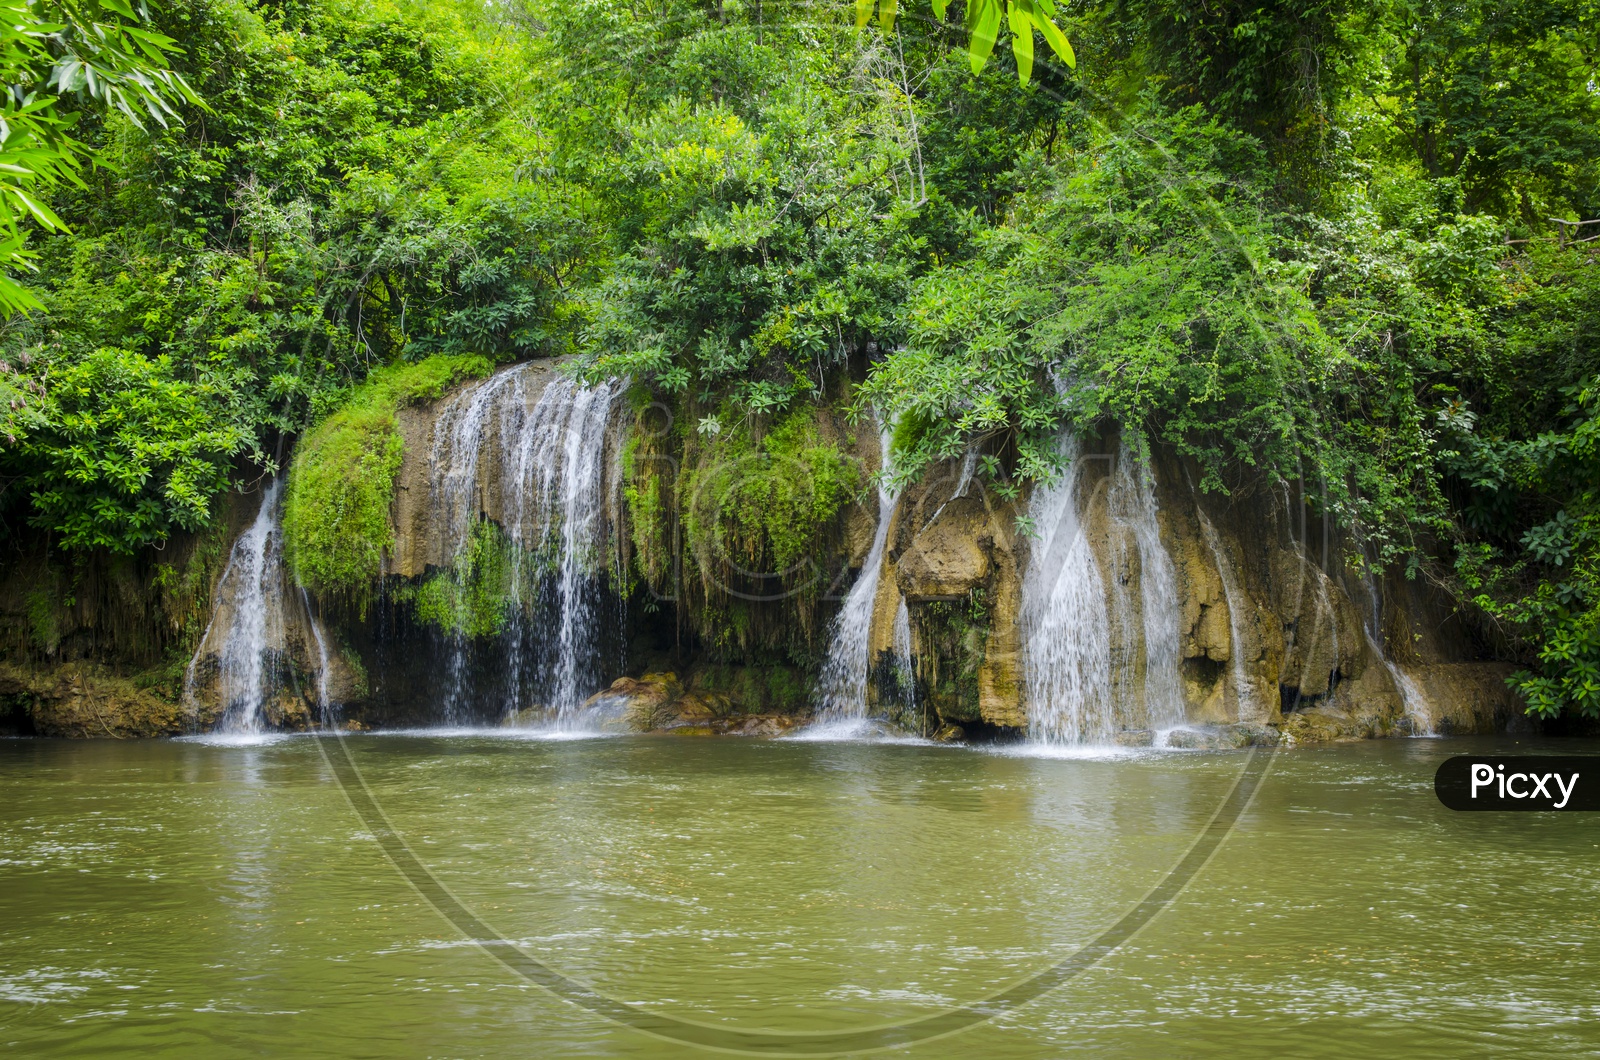 A Low Waterfalls  in the tropical forest of Thailand